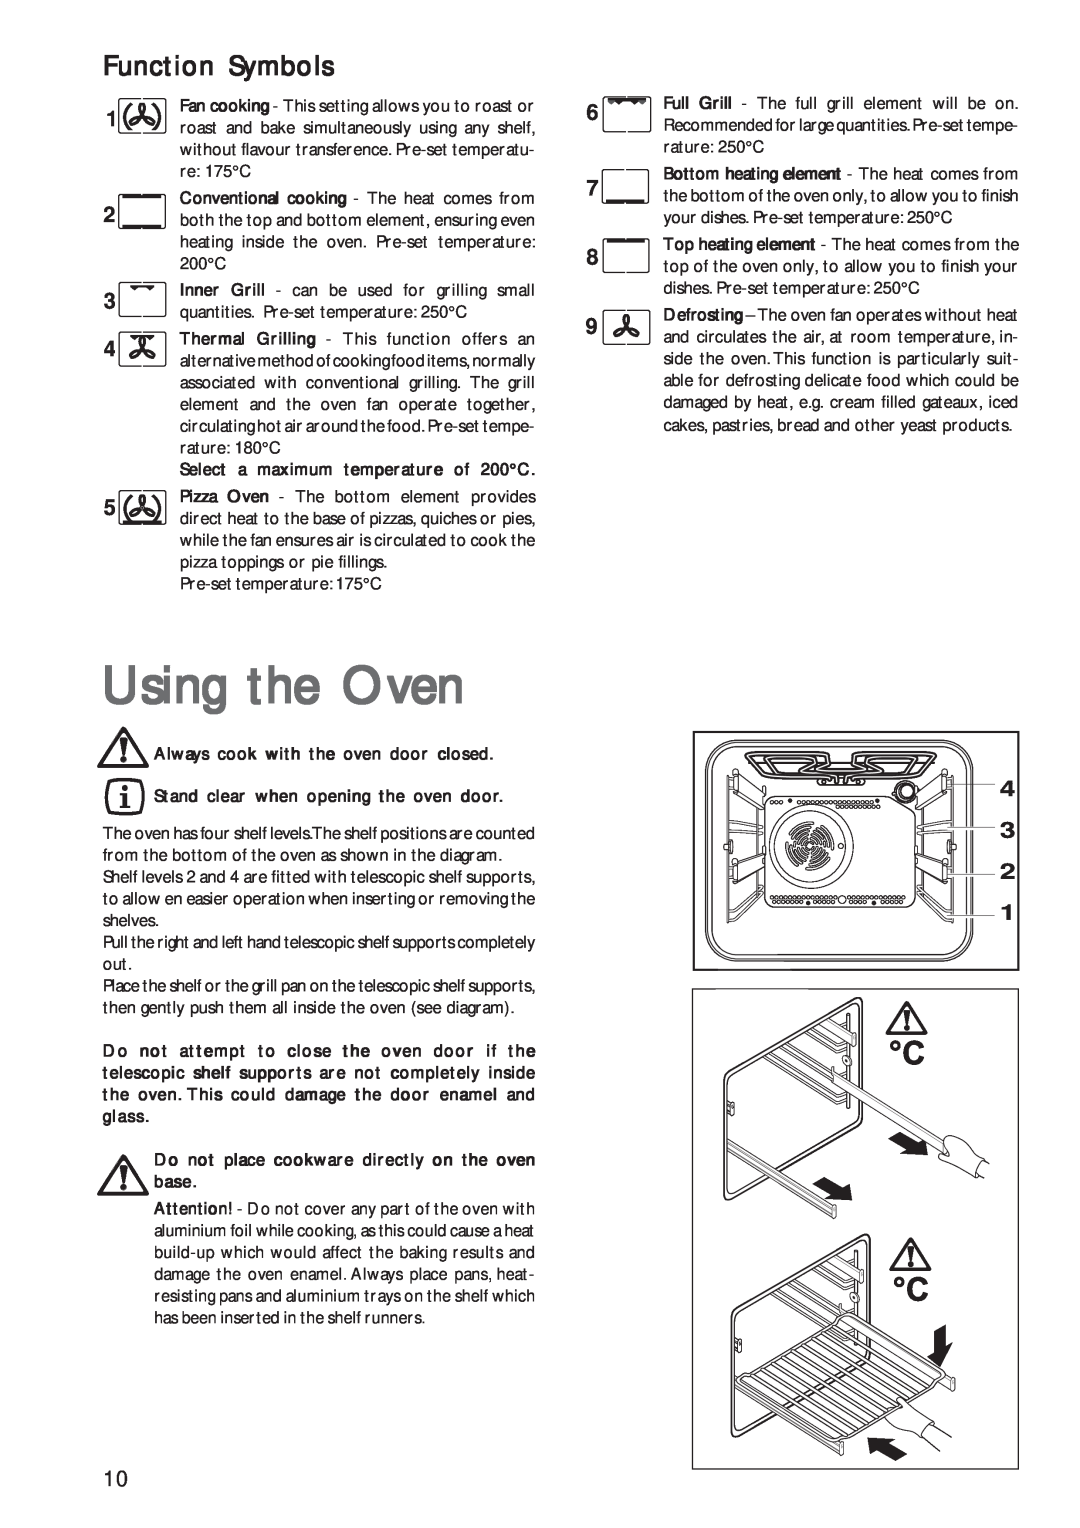 John Lewis JLBIOS602 instruction manual Using the Oven, Function Symbols, Conventional cooking - The heat comes from 